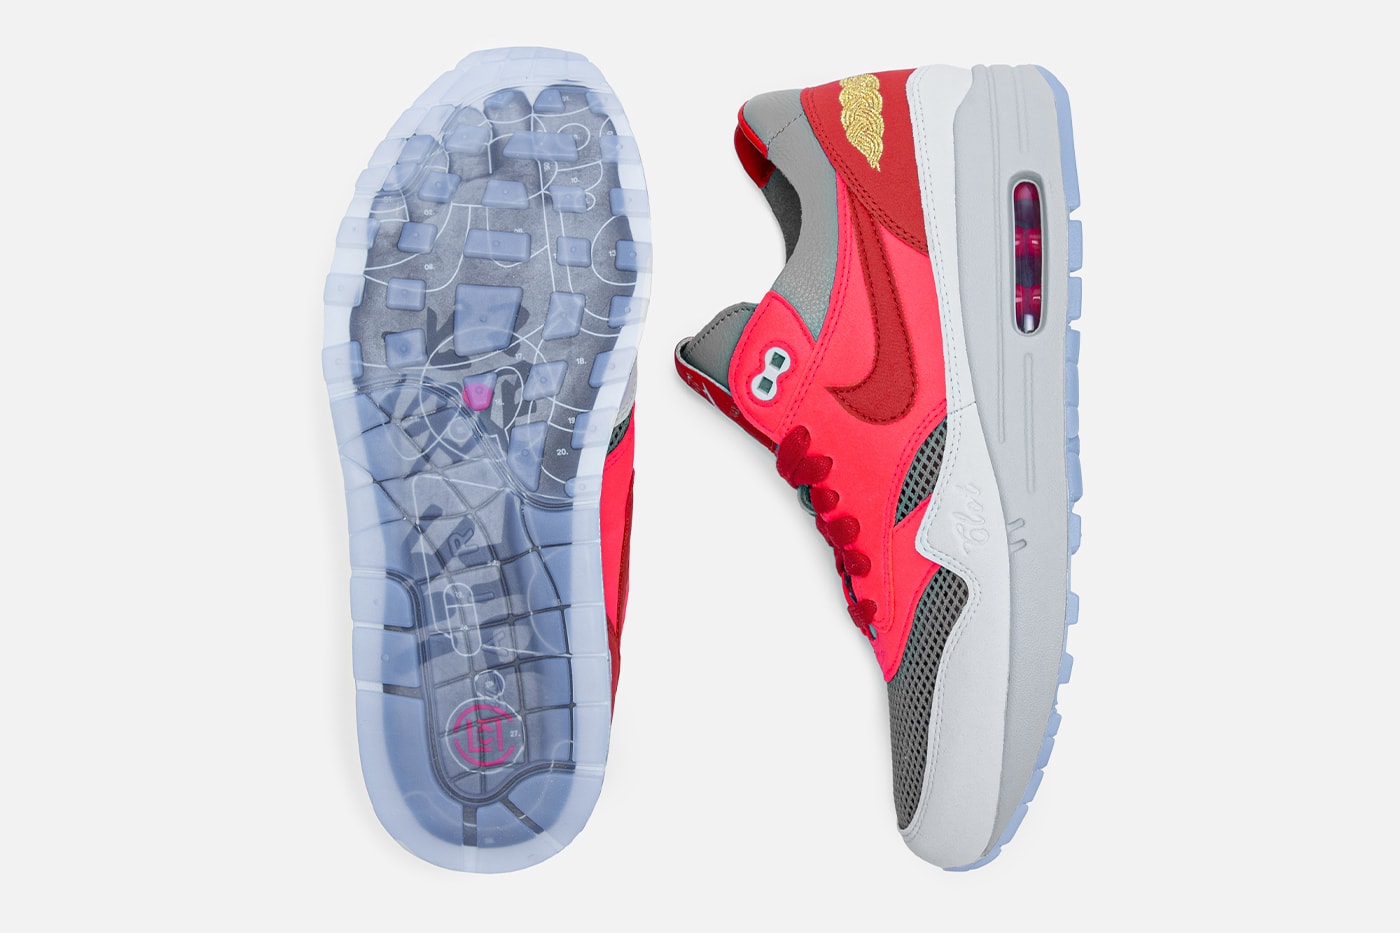 CLOT Nike Air Max 1 K.O.D. Solar Red Official Look Release Info Buy Price Date Kevin Poon Edison Chen